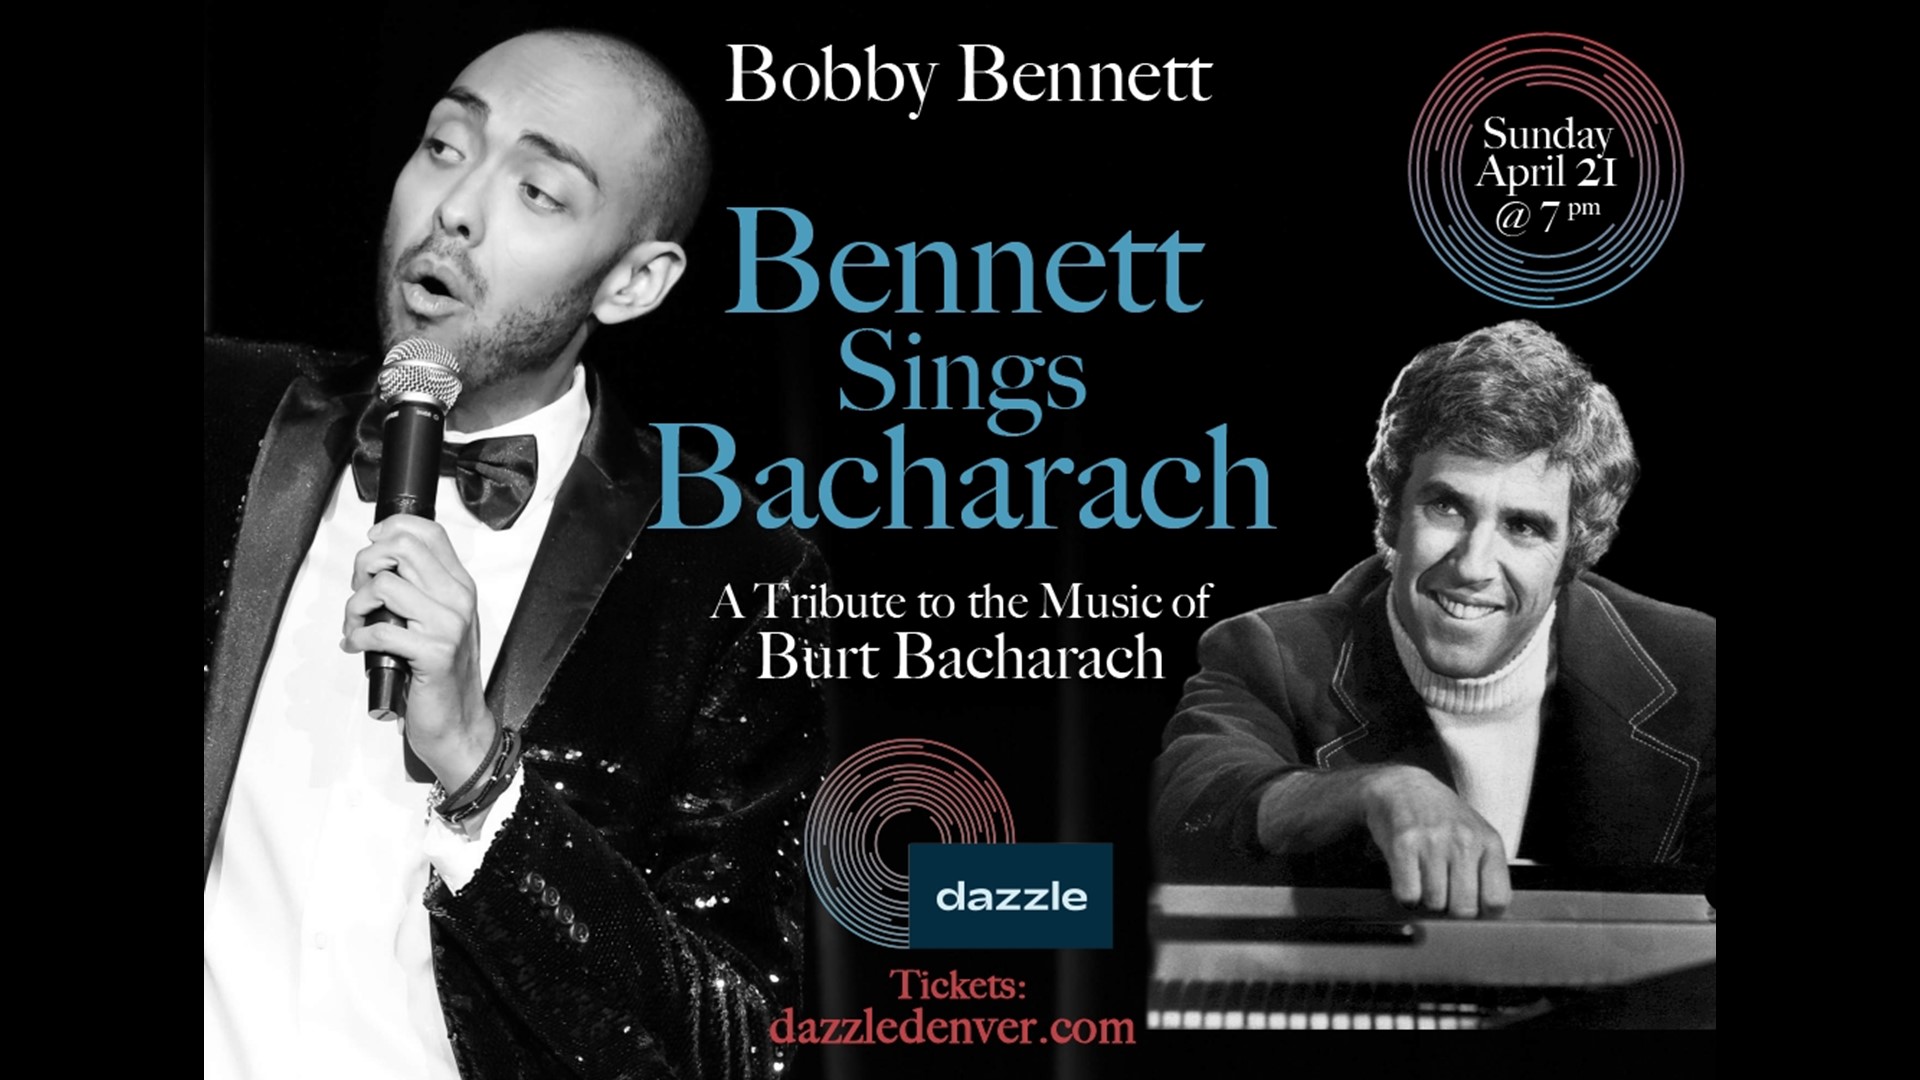 'Bennett Sings Bacharach: A Tribute to the Music of Burt Bacharach' happens at the Dazzle Jazz Club at 7pm on April 21st. Visit DazzleDenver.com